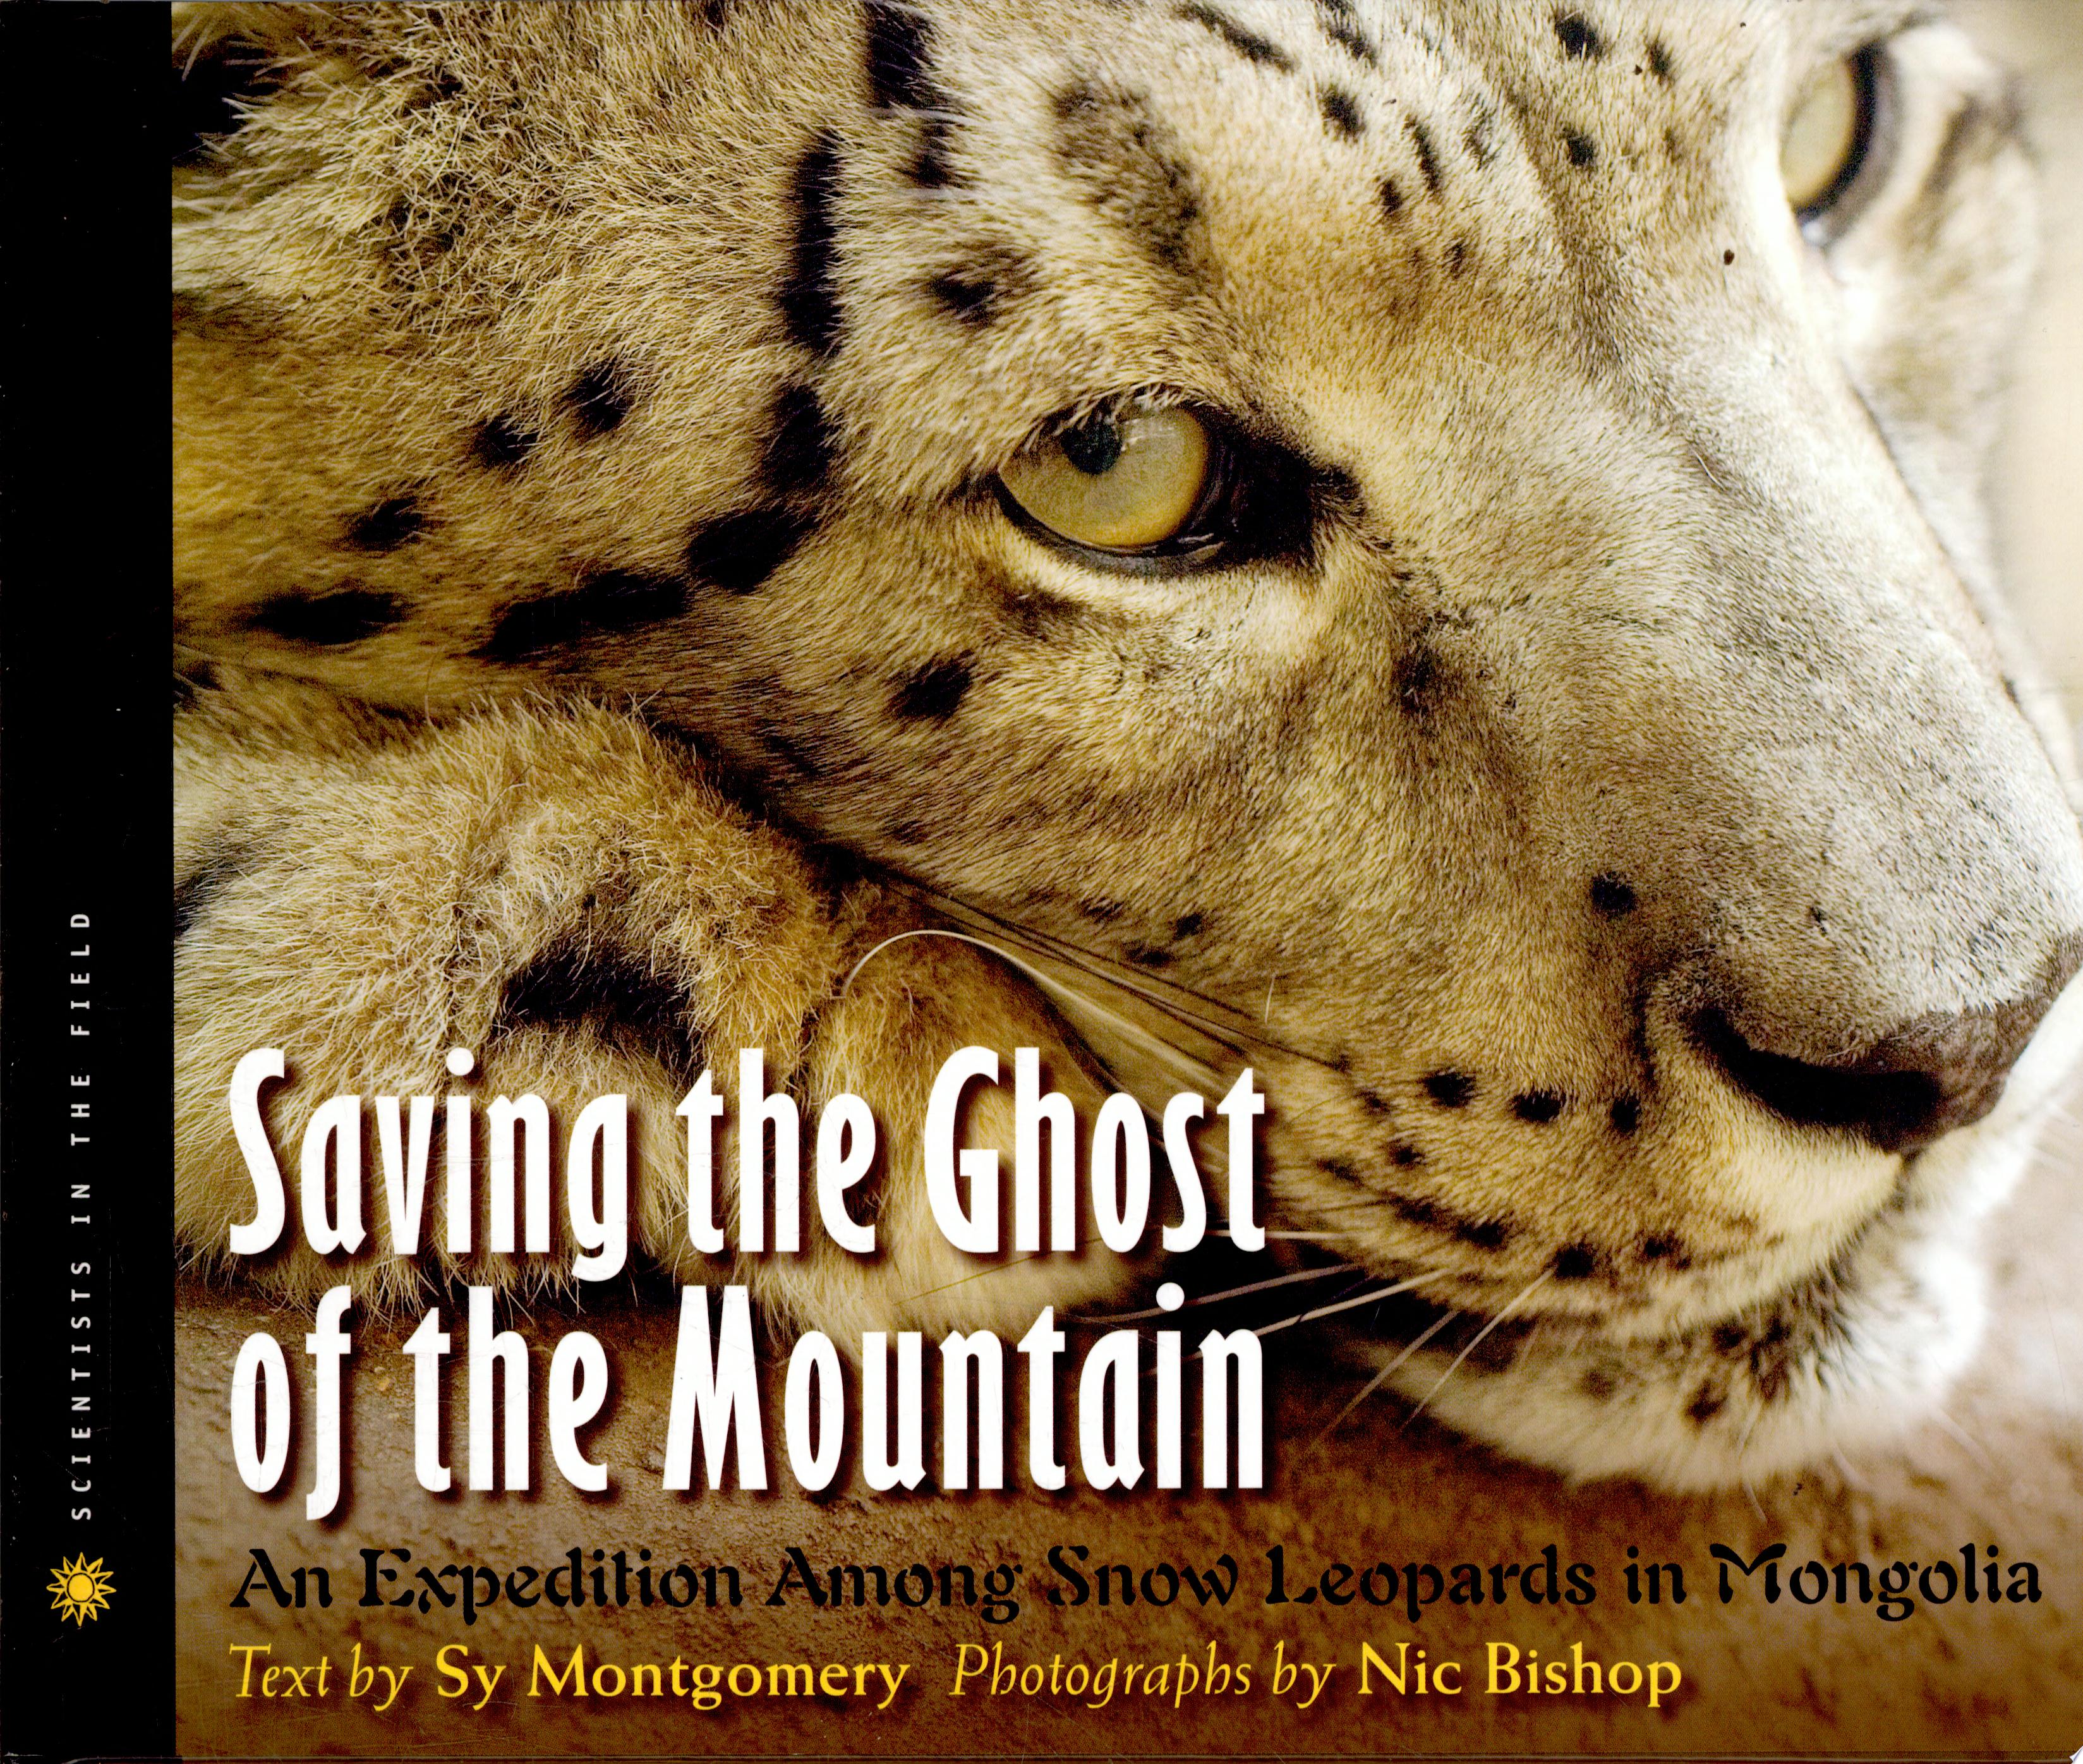 Image for "Saving the Ghost of the Mountain"